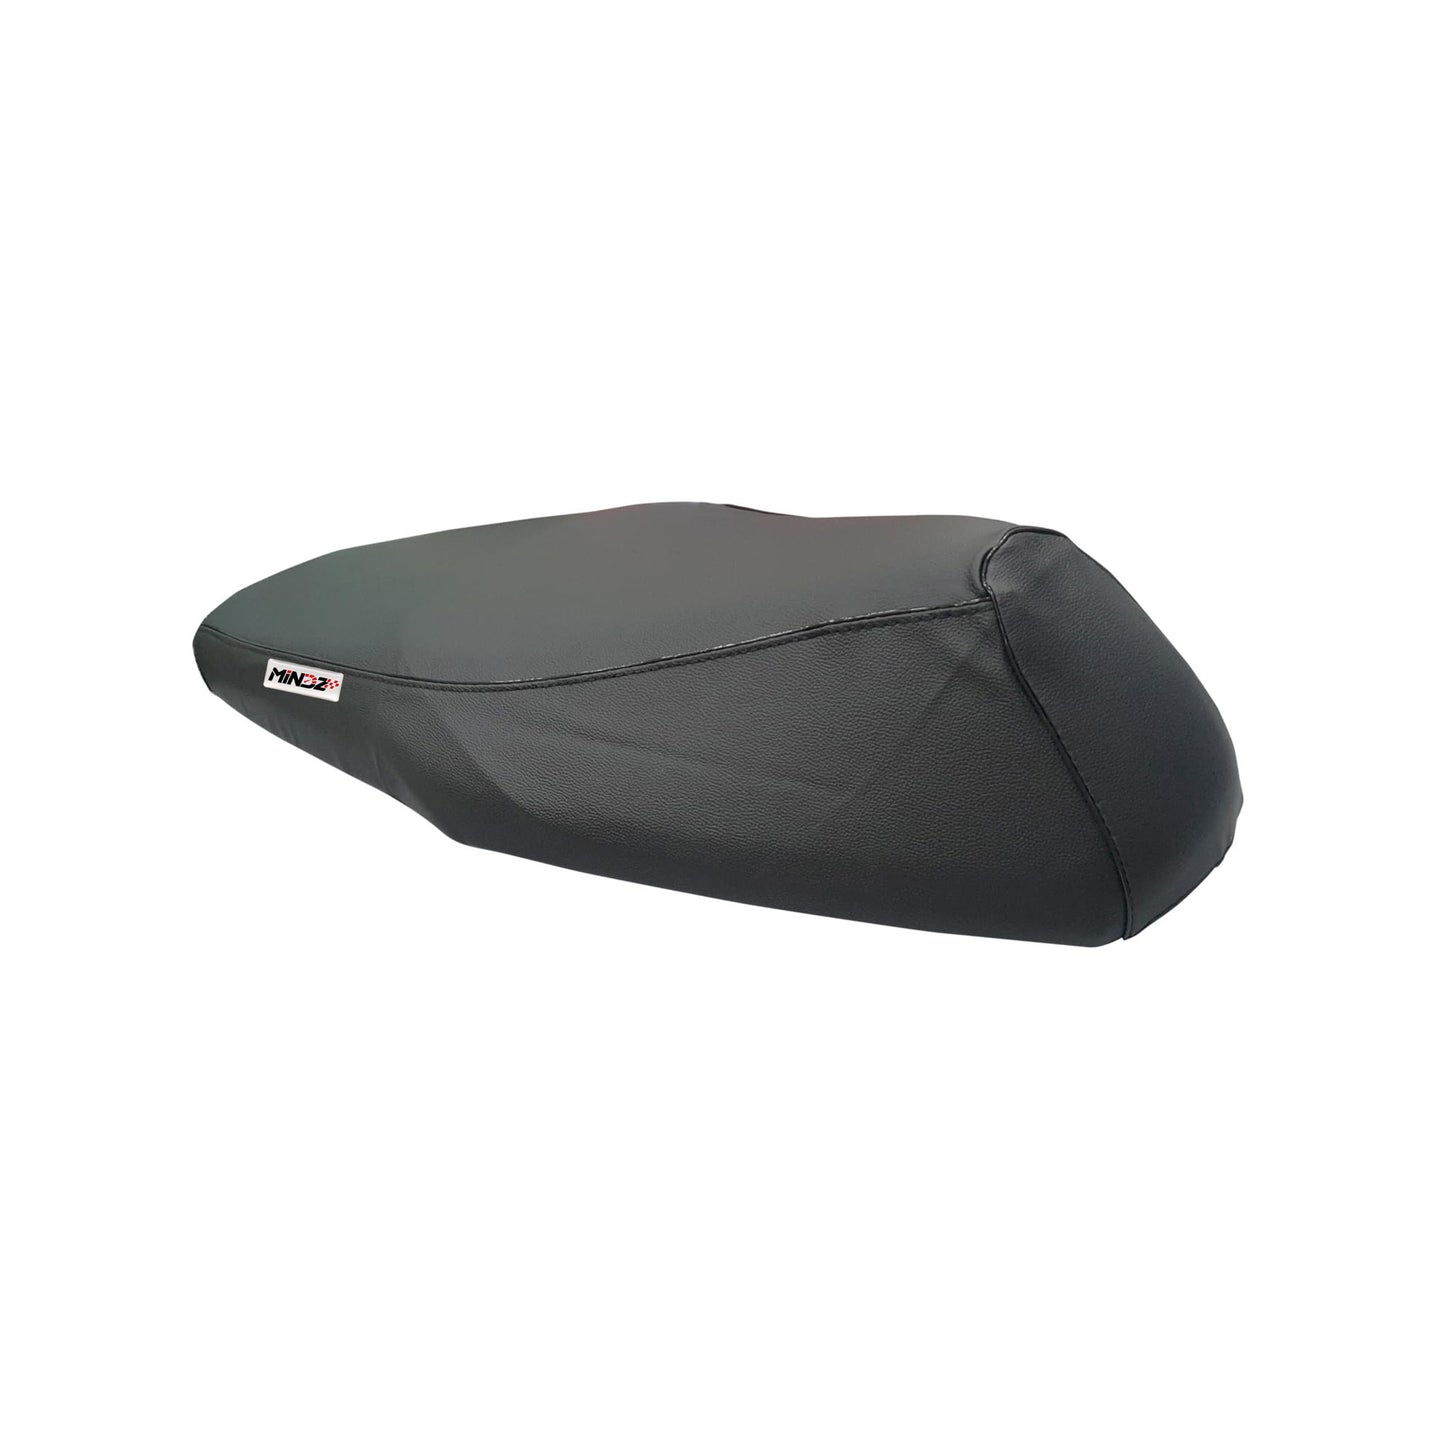 SEAT COVER RAY ZR 125 & RAY ZR 125 STREET RALLY | BLACK COLOUR